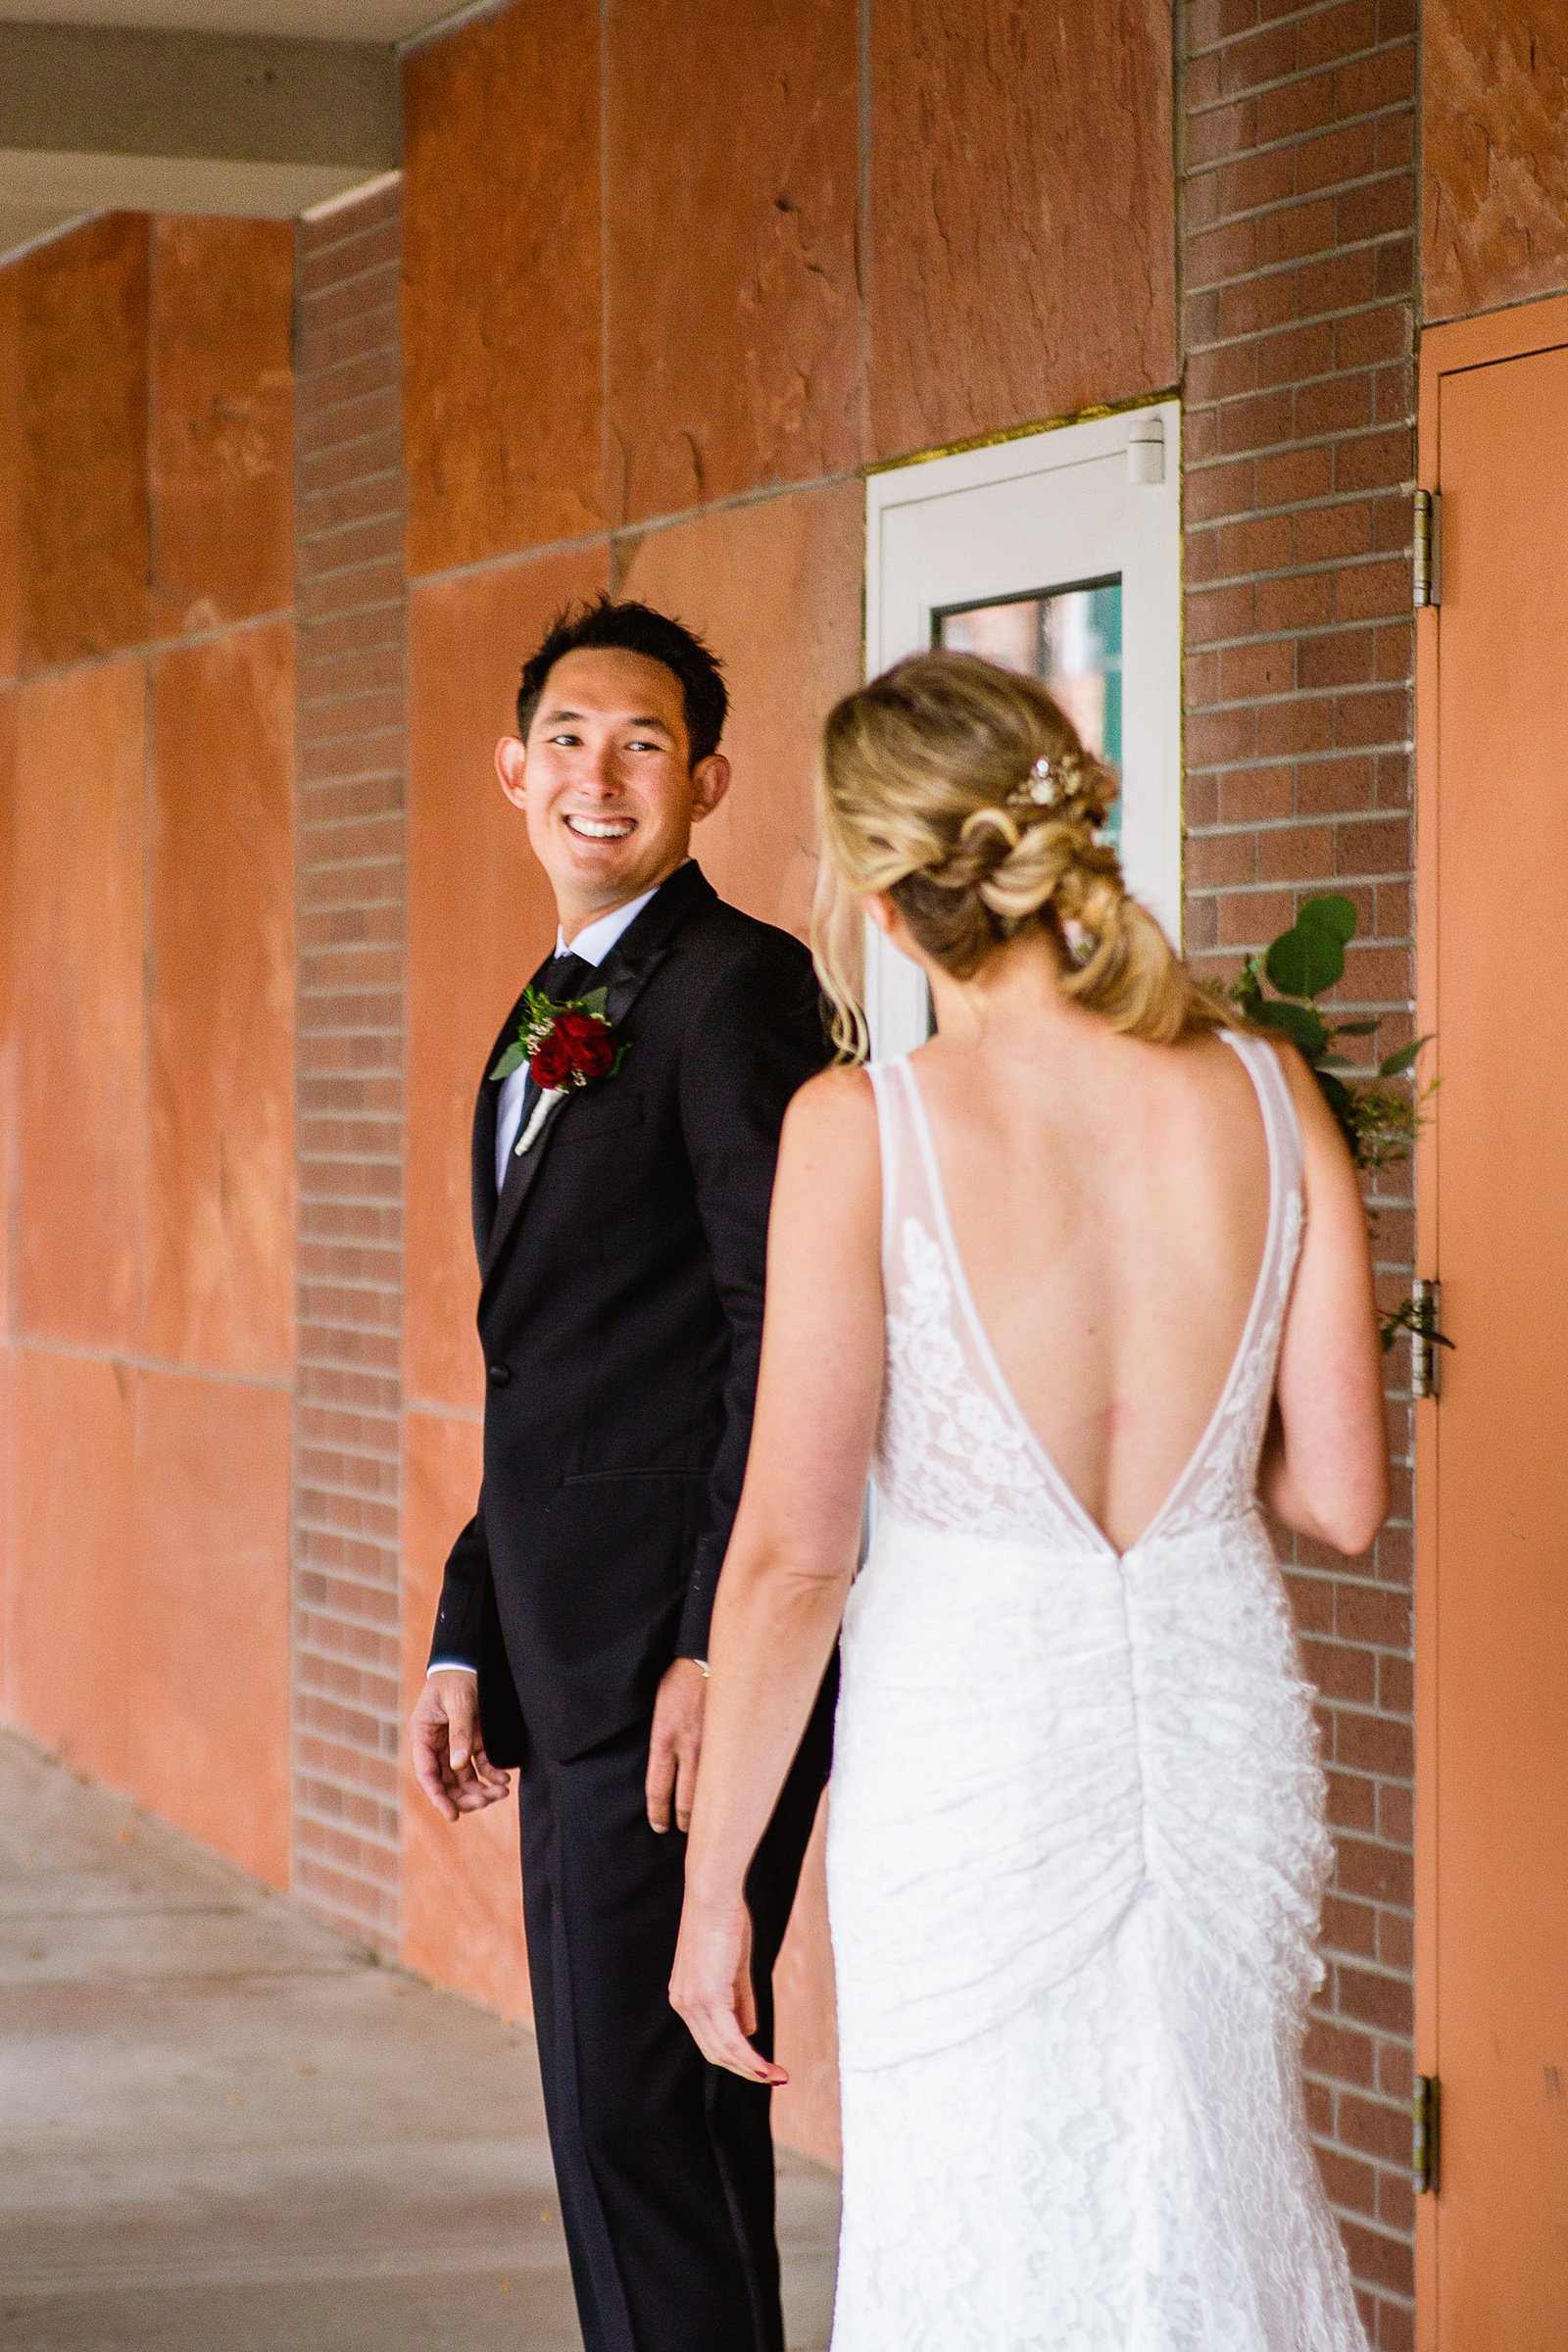 Bride and groom's first look at Flagstaff Courthouse by Arizona wedding photographer PMA Photography.